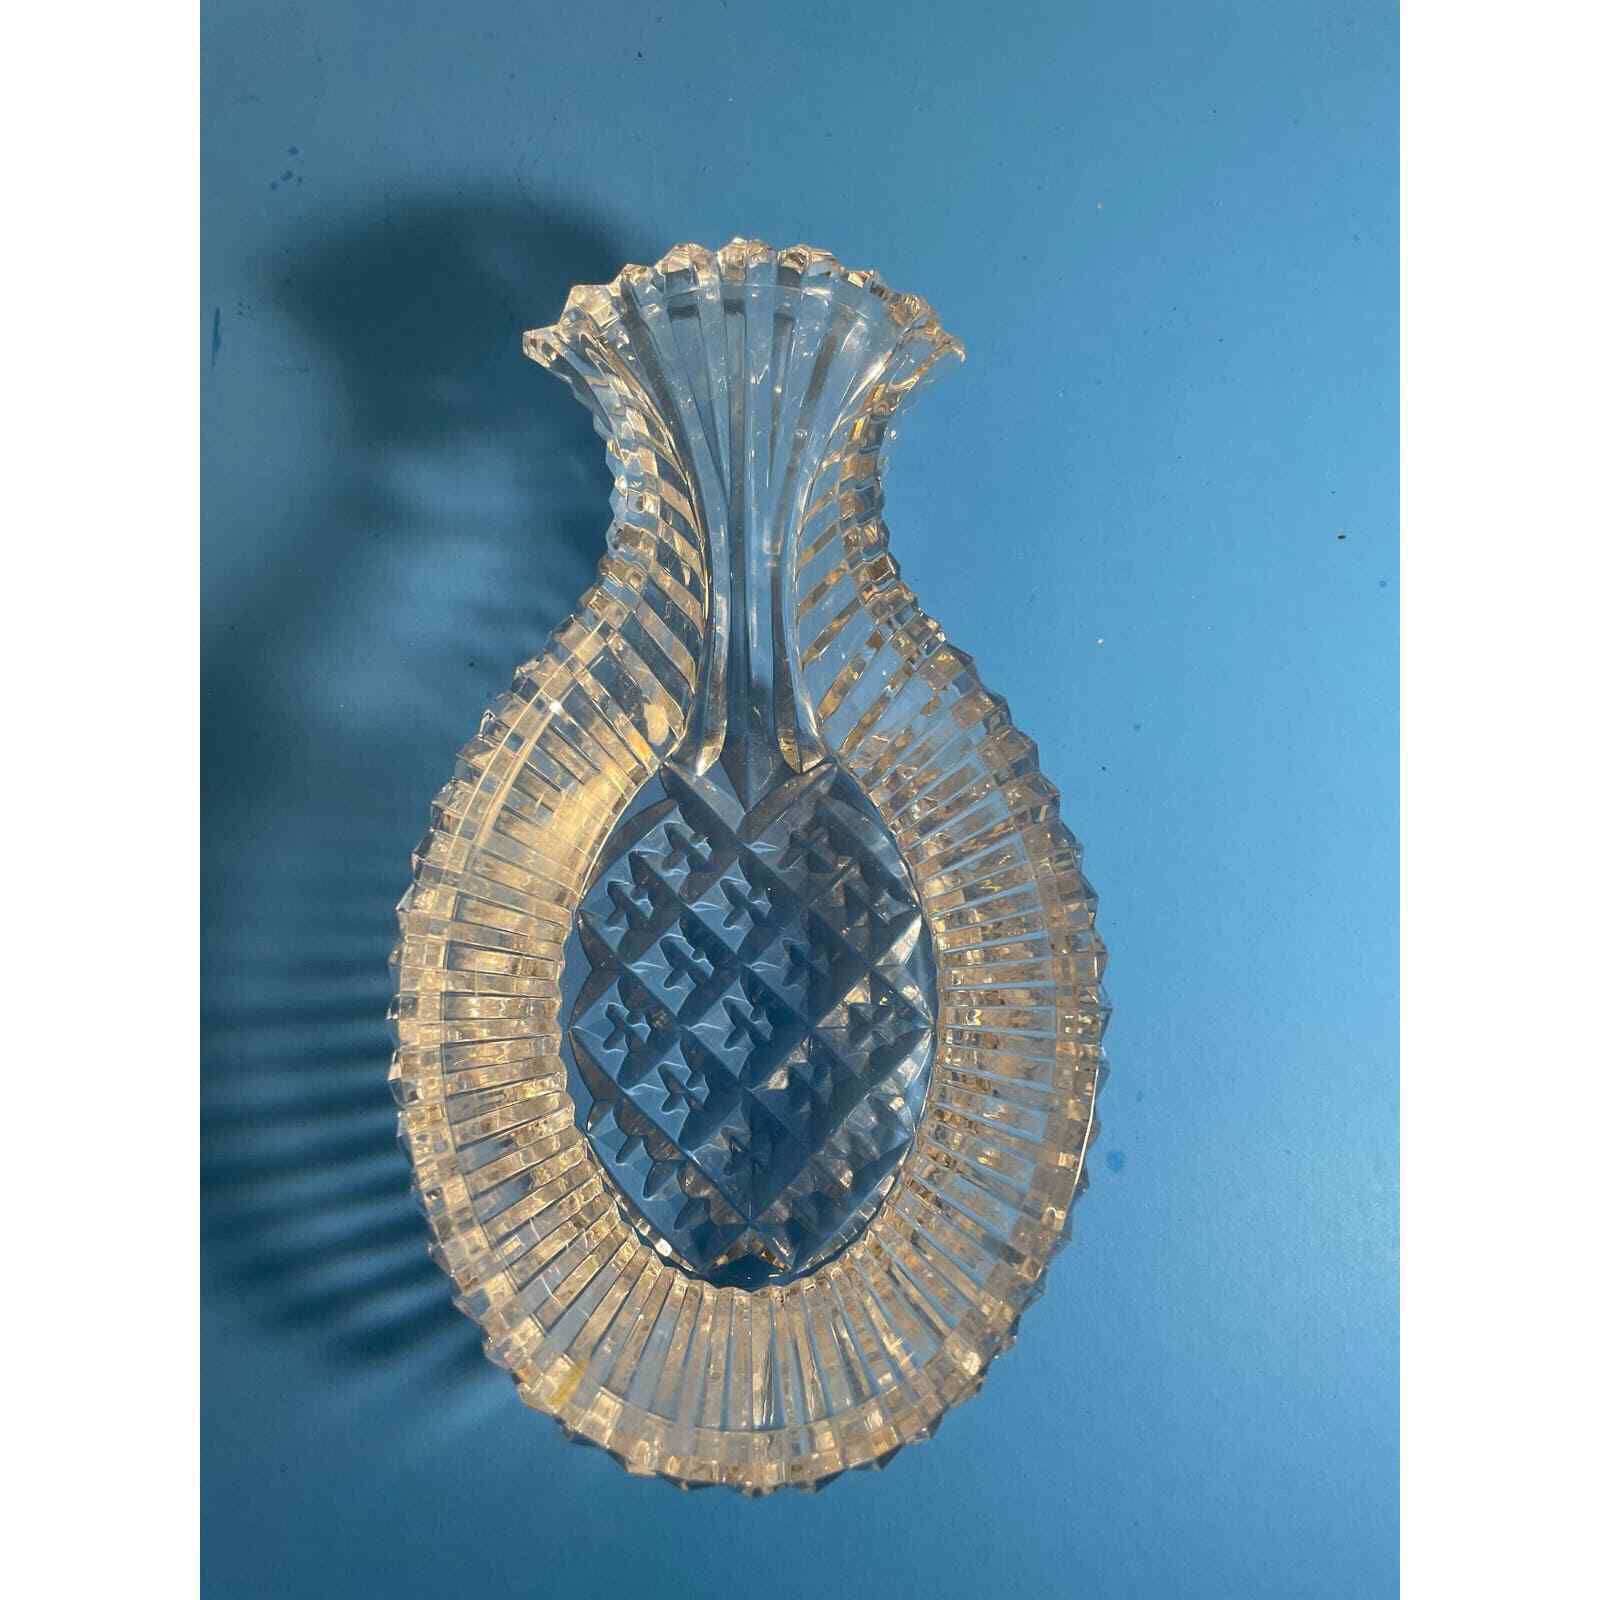 Unique Vintage Waterford Crystal 6 1/2 Inch Pineapple Hospitality Dish